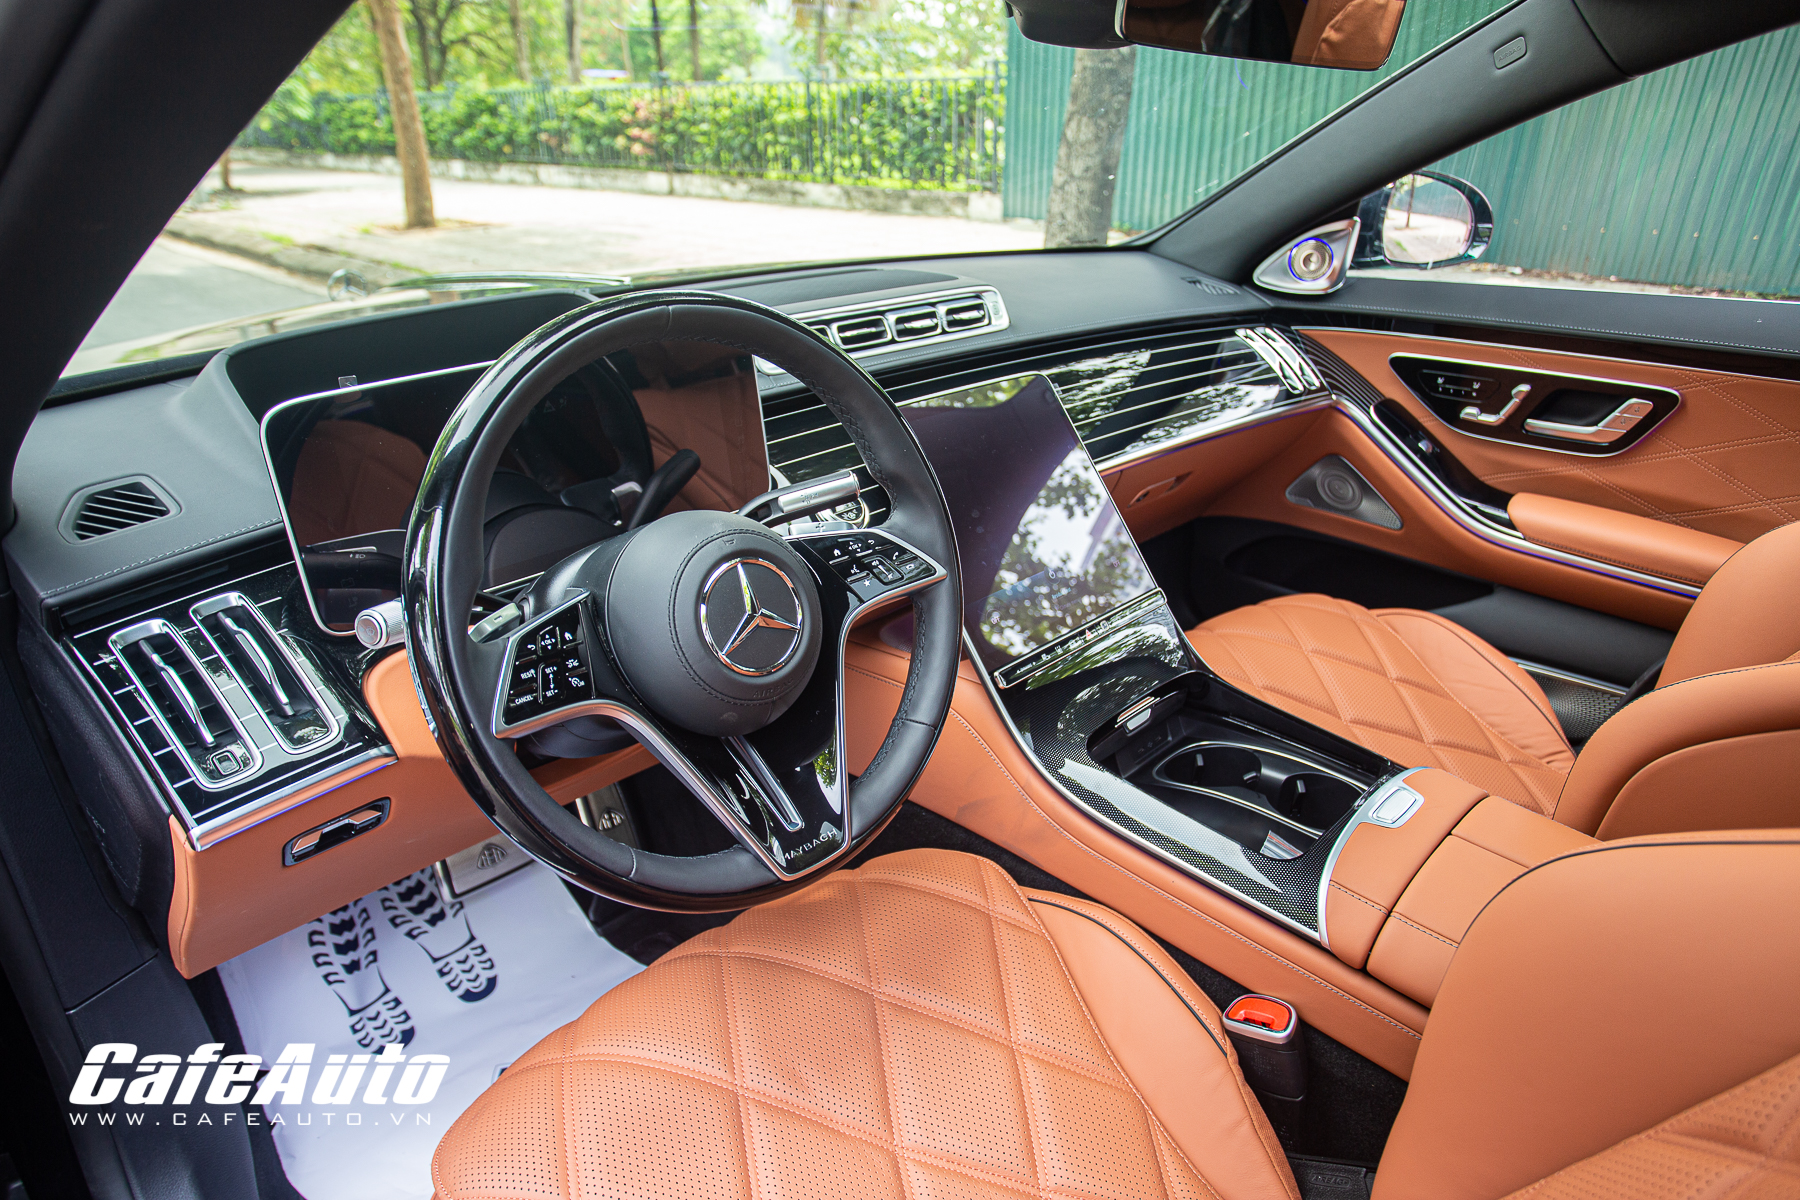 mercedes-maybach-s-680-chinh-hang-cafeautovn-9